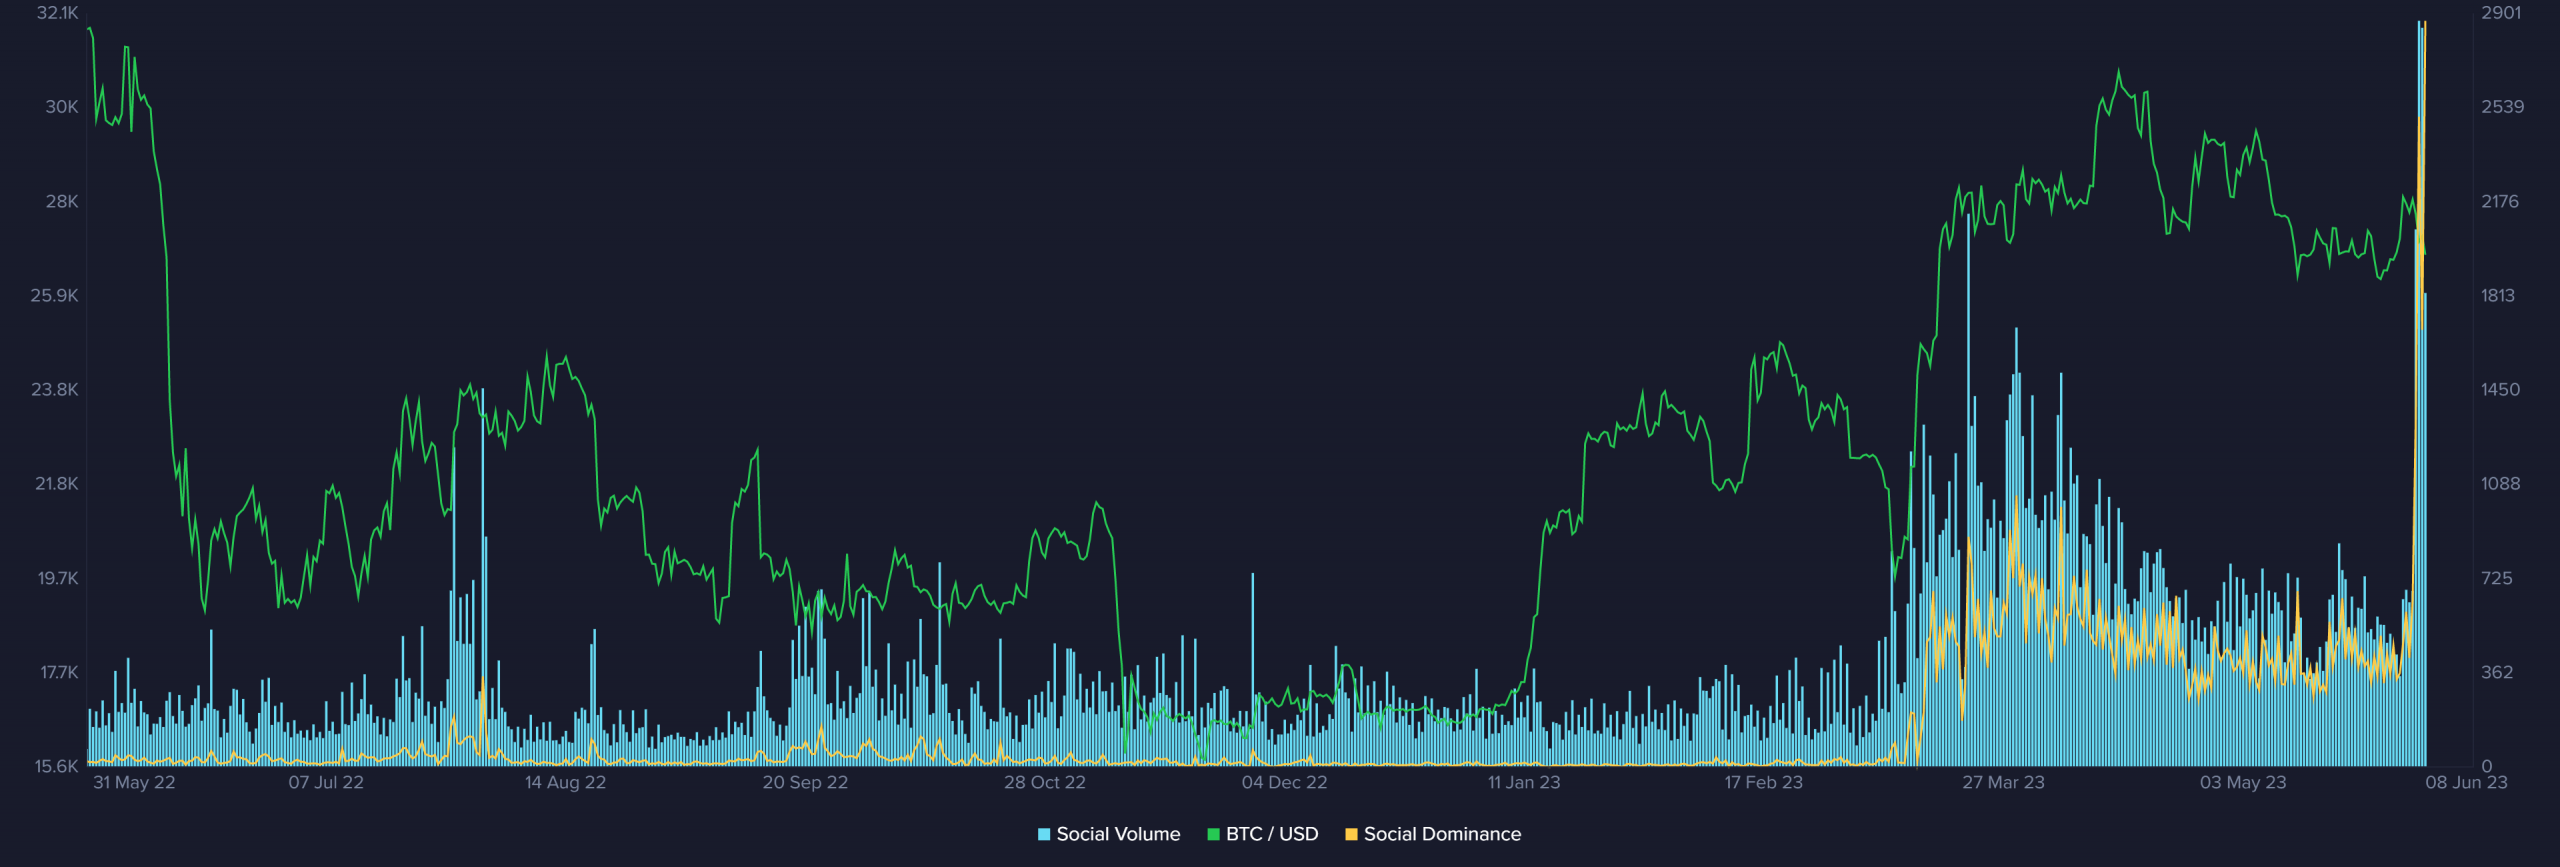 XRP social dominance and volume as seen on Sentiment